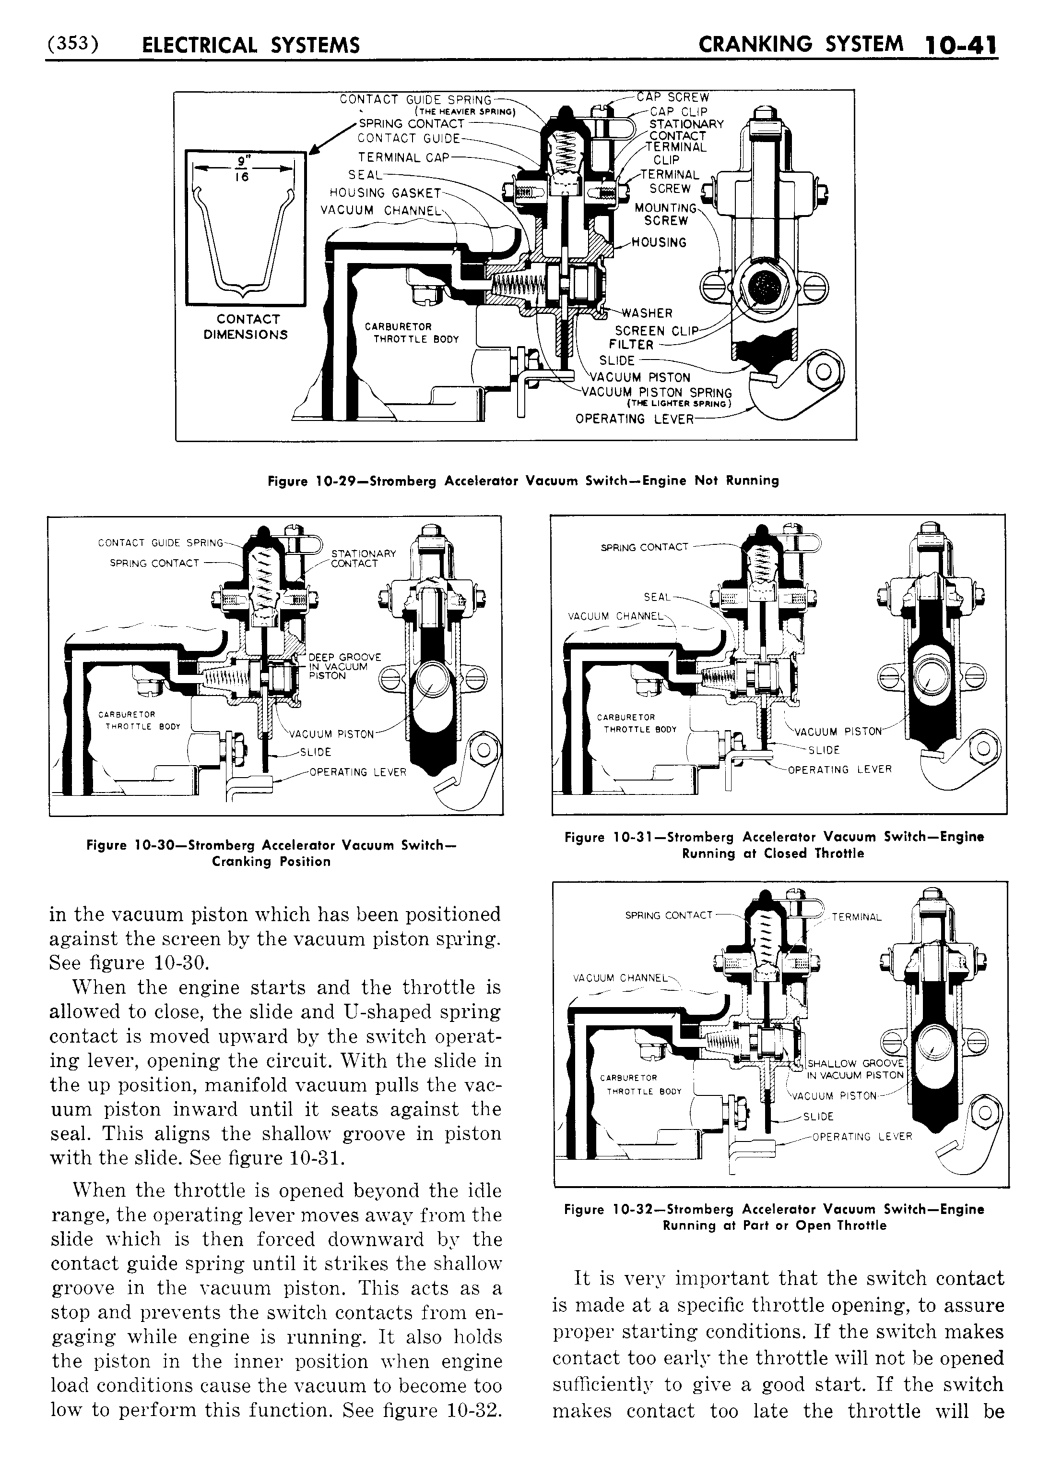 n_11 1954 Buick Shop Manual - Electrical Systems-041-041.jpg